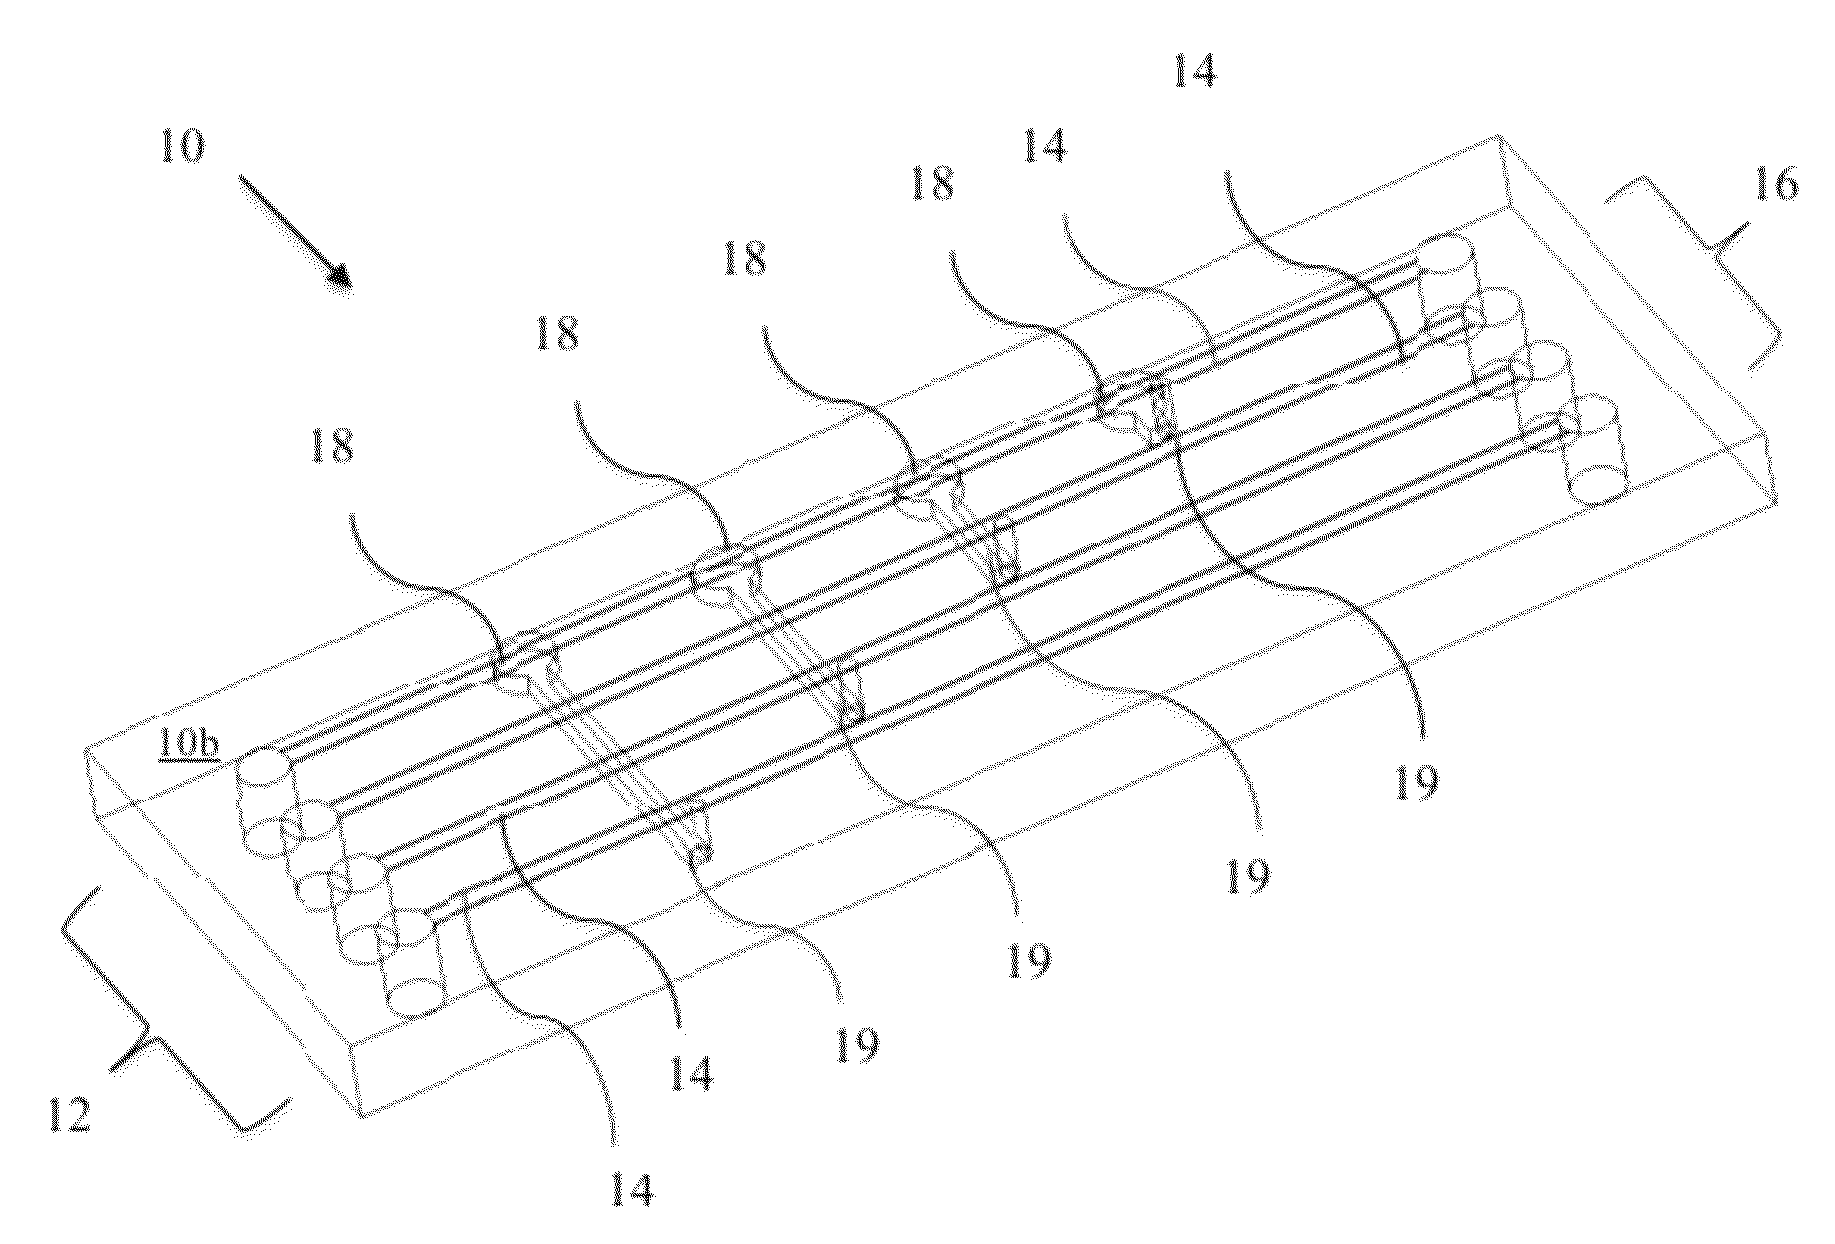 Microfluidic cytochemical staining system